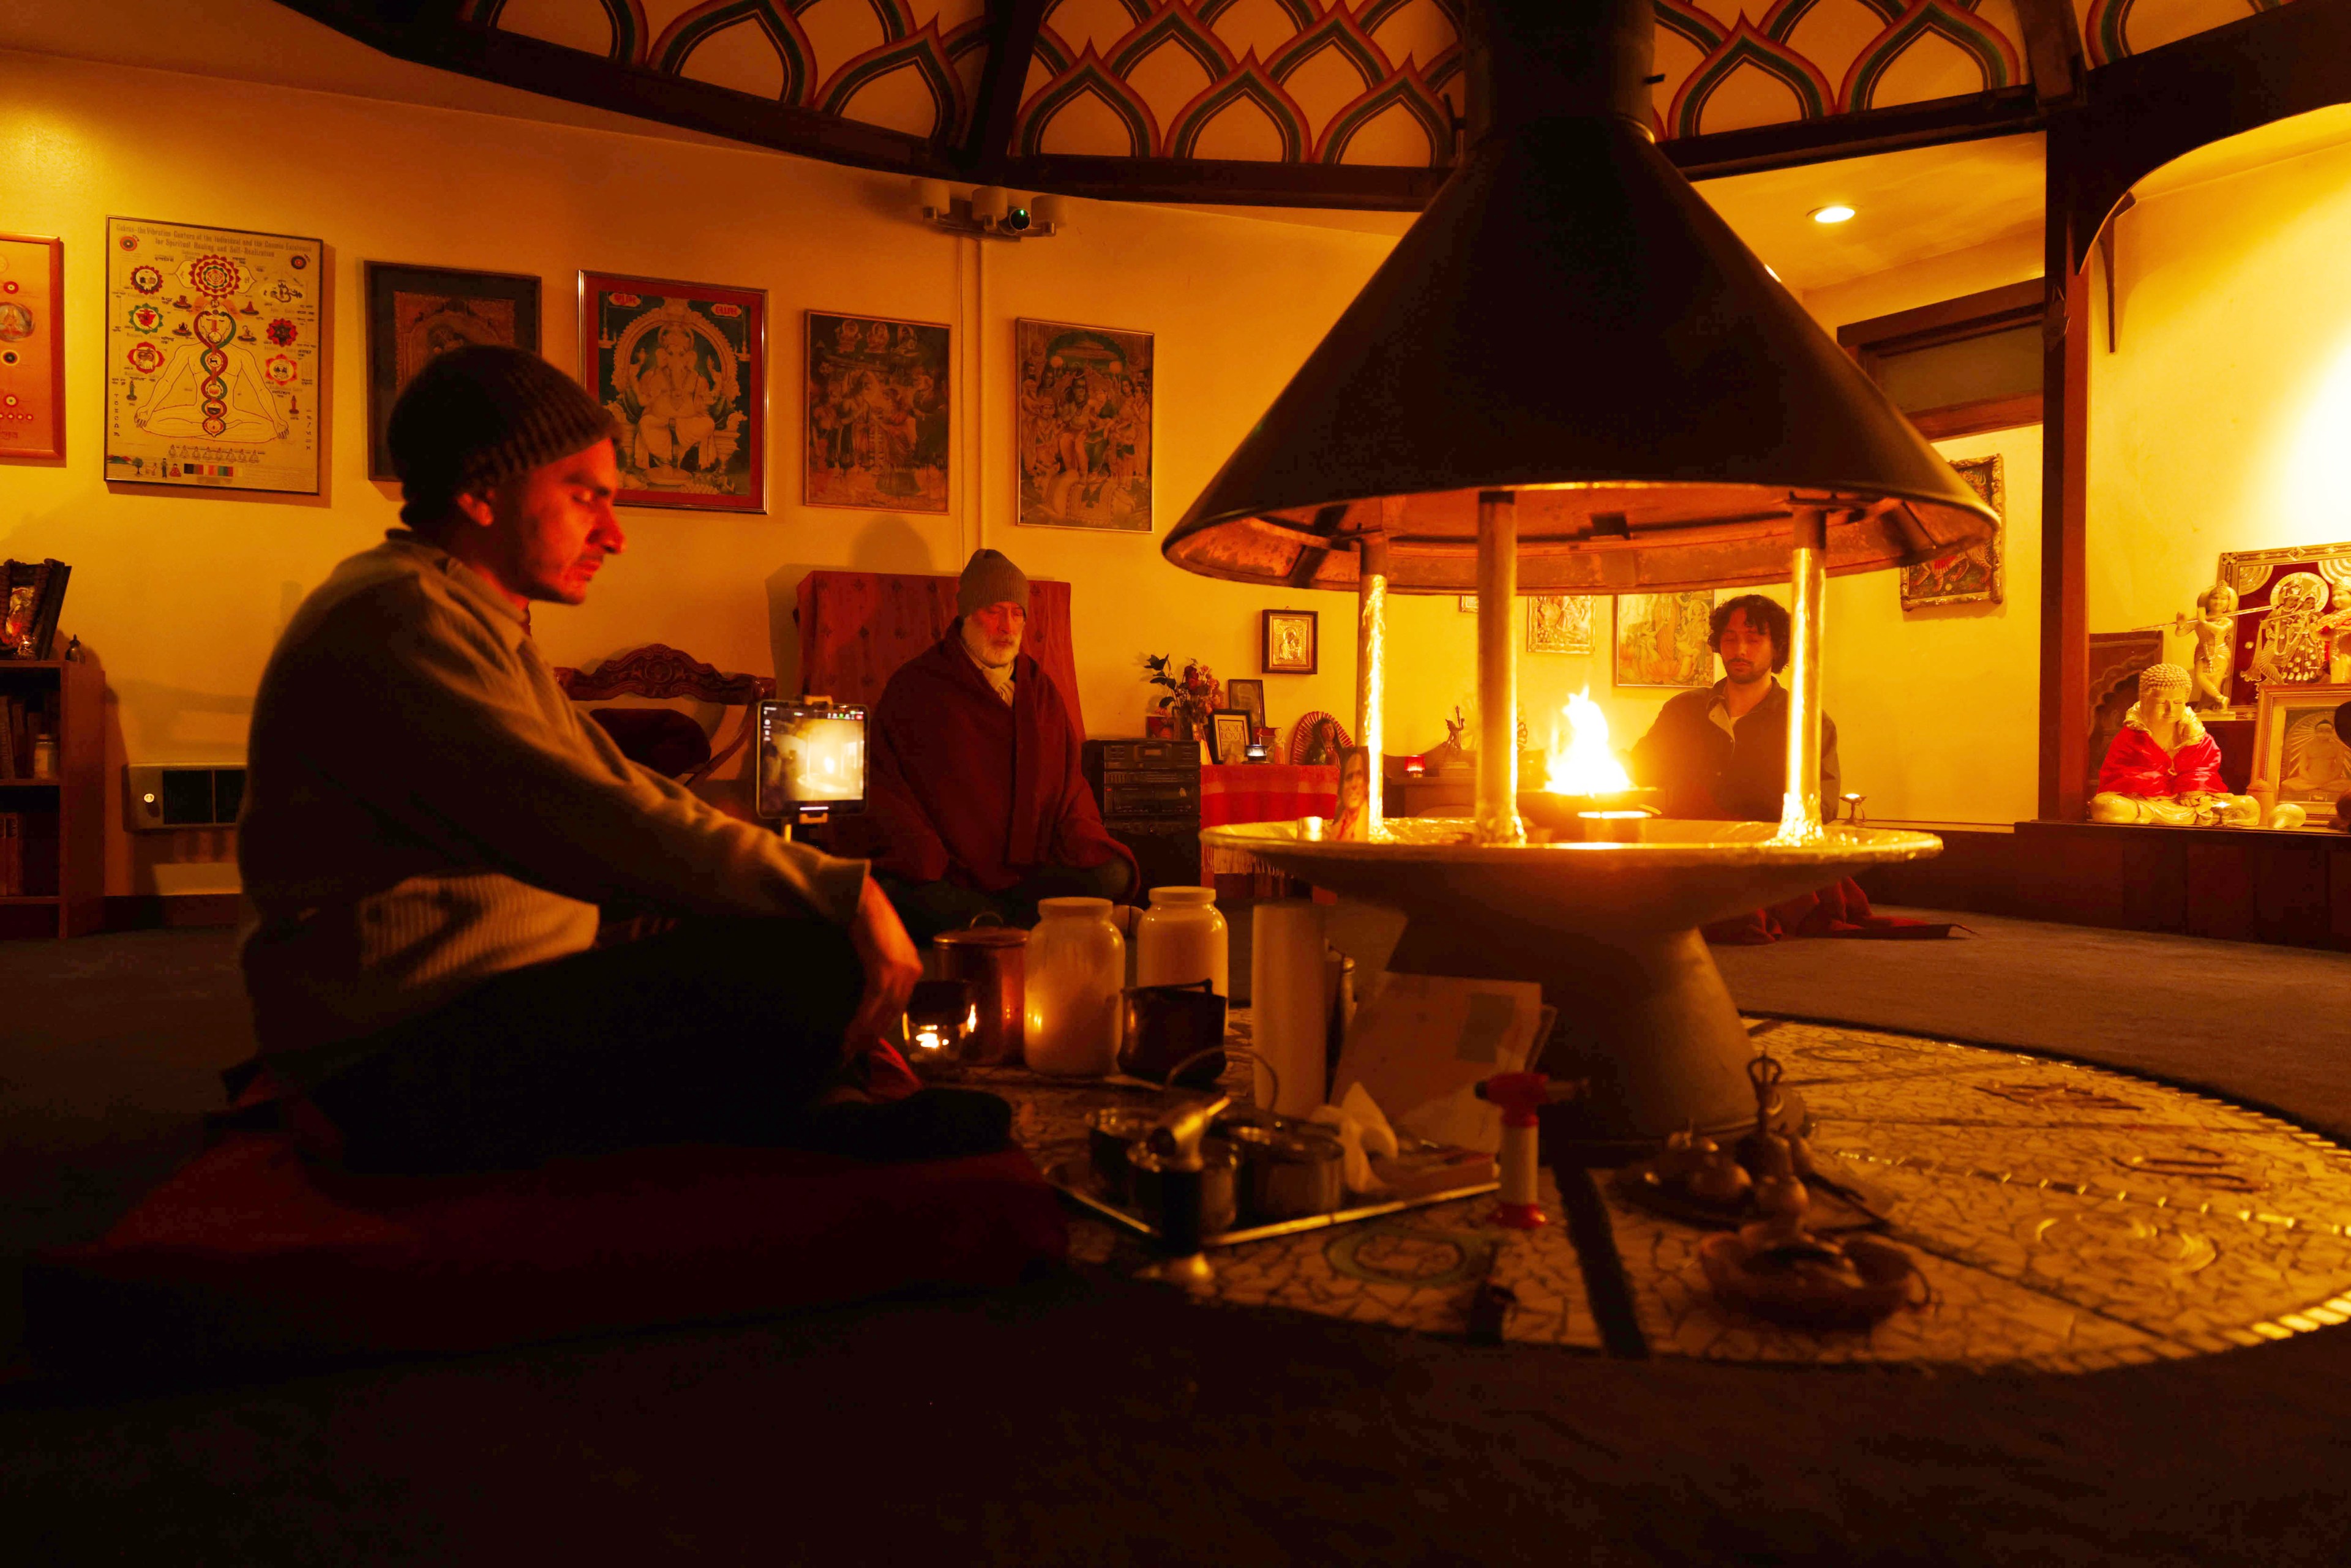 Three people sit arond a fire ceremony in the center of a room with Hindu gods and goddesses on the wall.